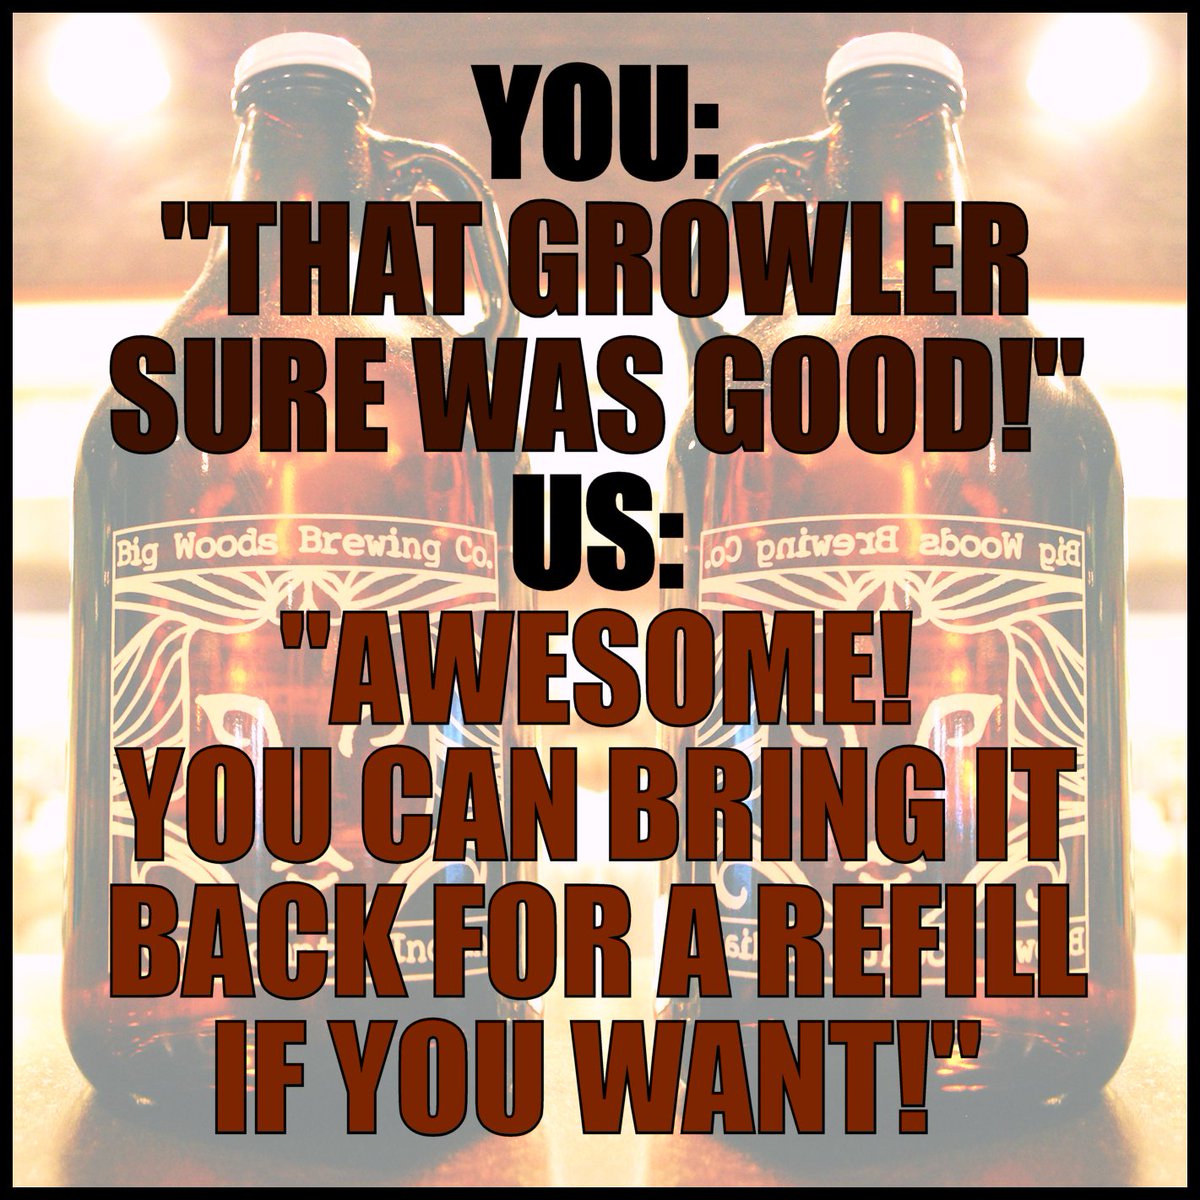 #ThirstyThursday: $9 growler refills all day; #LiveMusic at #BigWoodsPizza from #TimMeyer, 7-9 p.m.